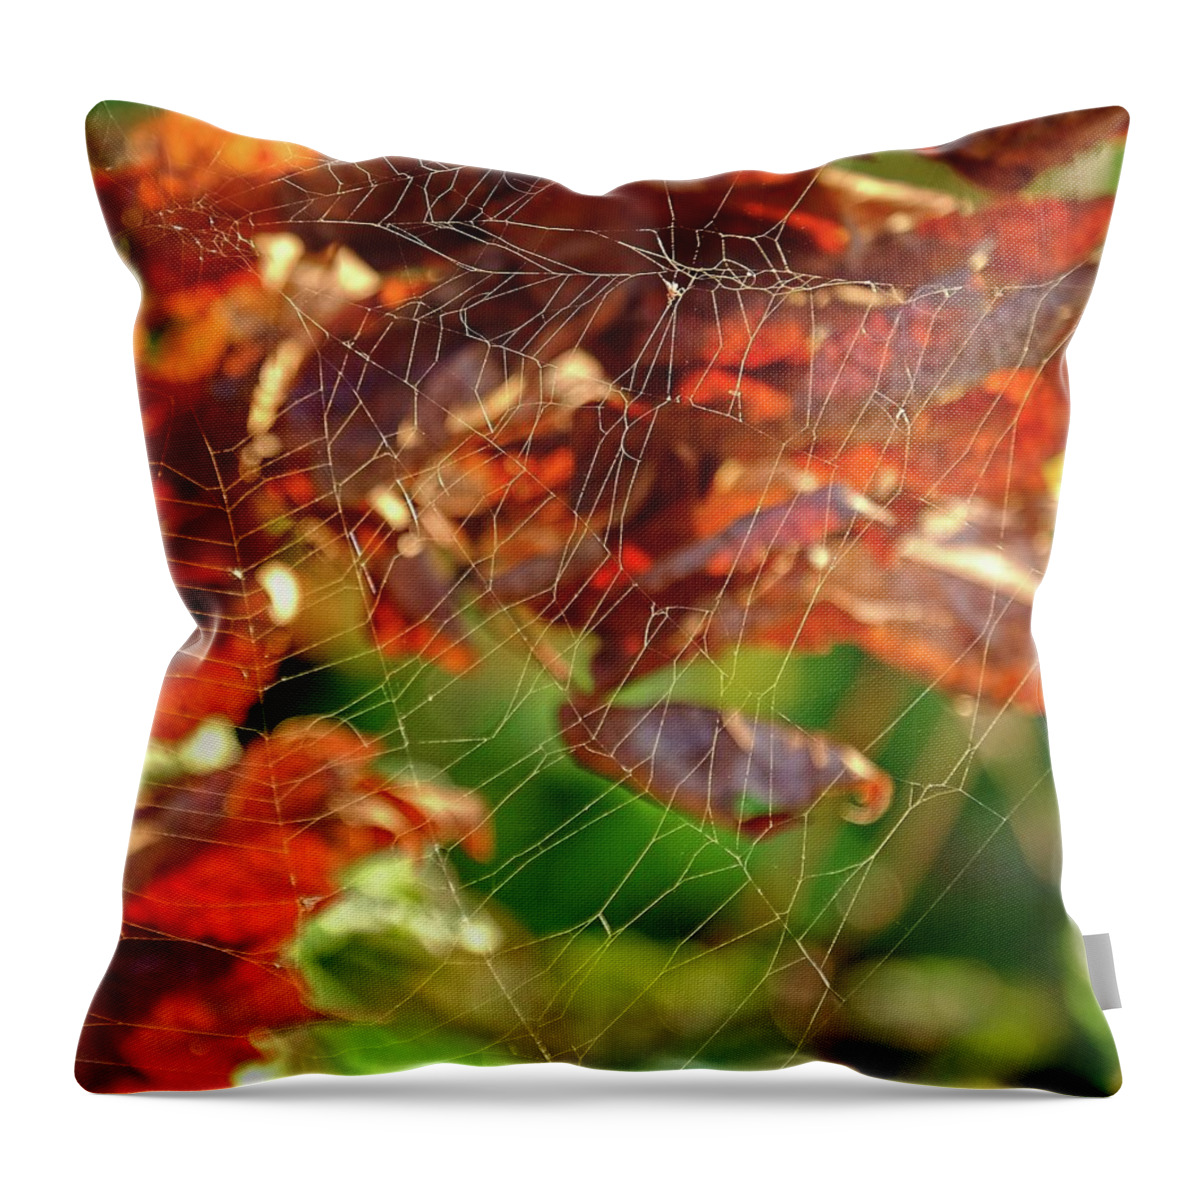 Fall Throw Pillow featuring the photograph Fall Spiderweb by Ronda Ryan